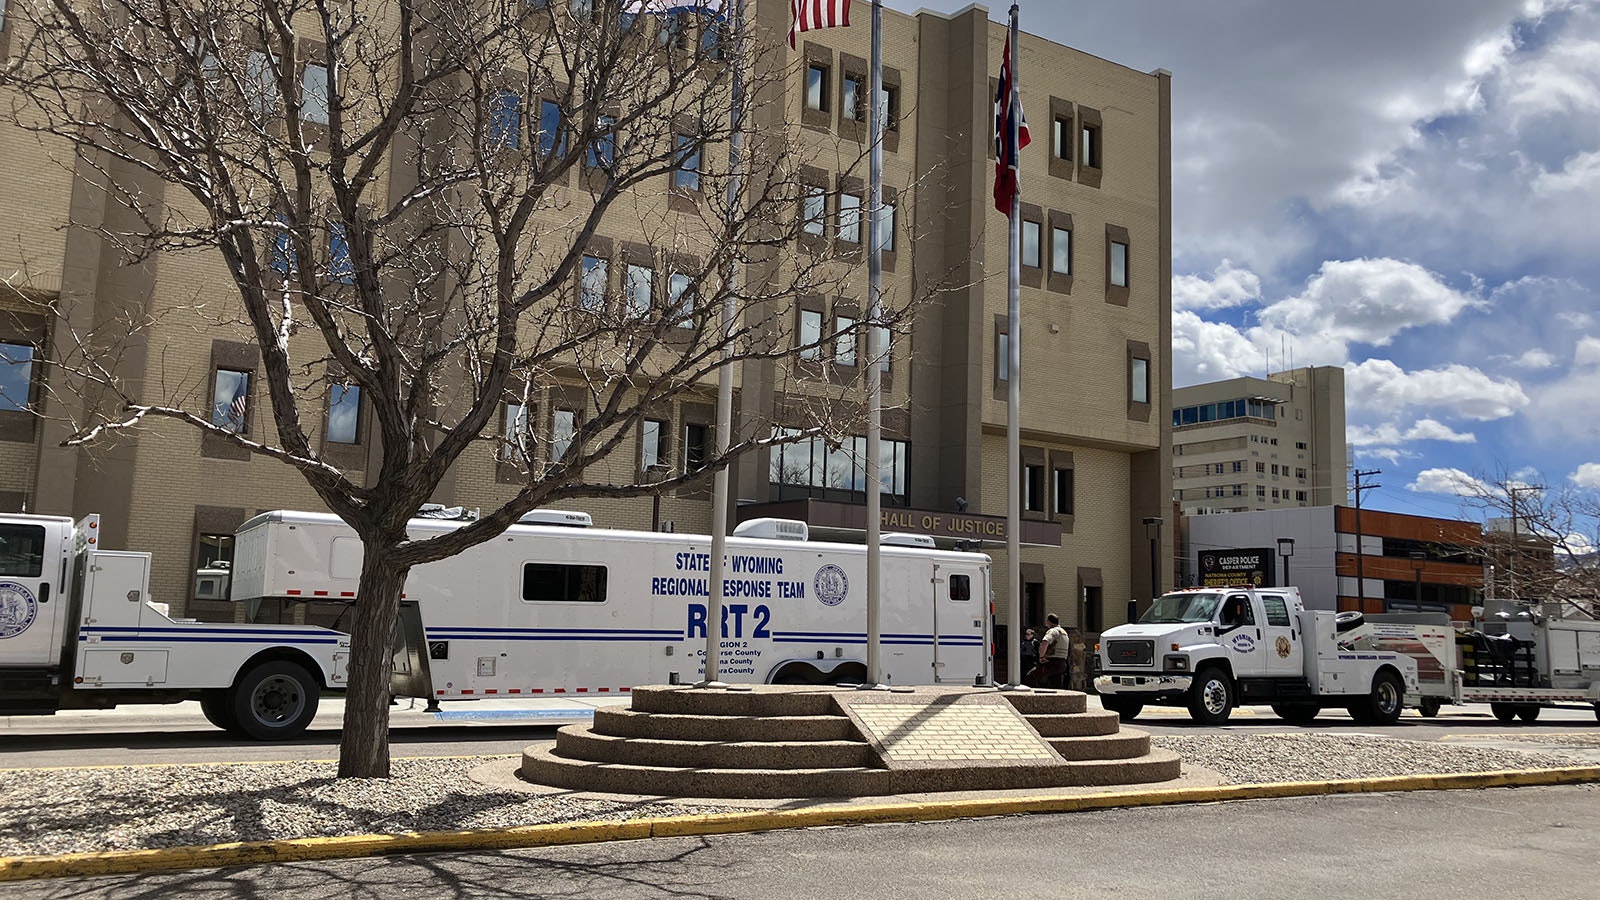 The Hall of Justice in Casper was evacuated and a special response team for hazardous substances called in after a suspicious package was delivered Thursday.